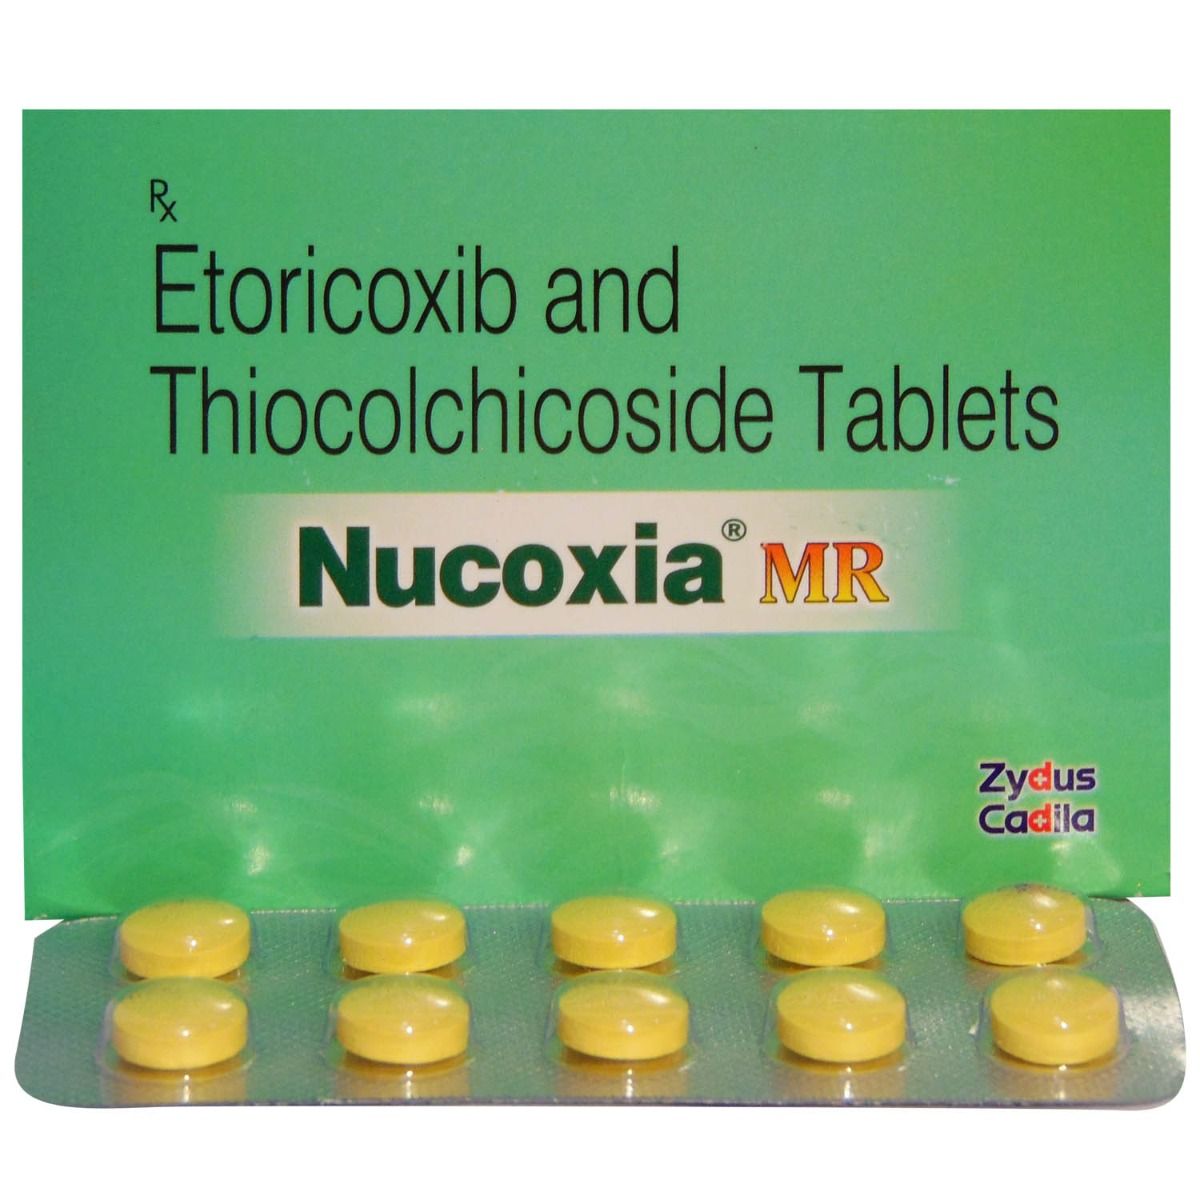 Nucoxia MR Tablet 10's, Pack of 10 TABLETS